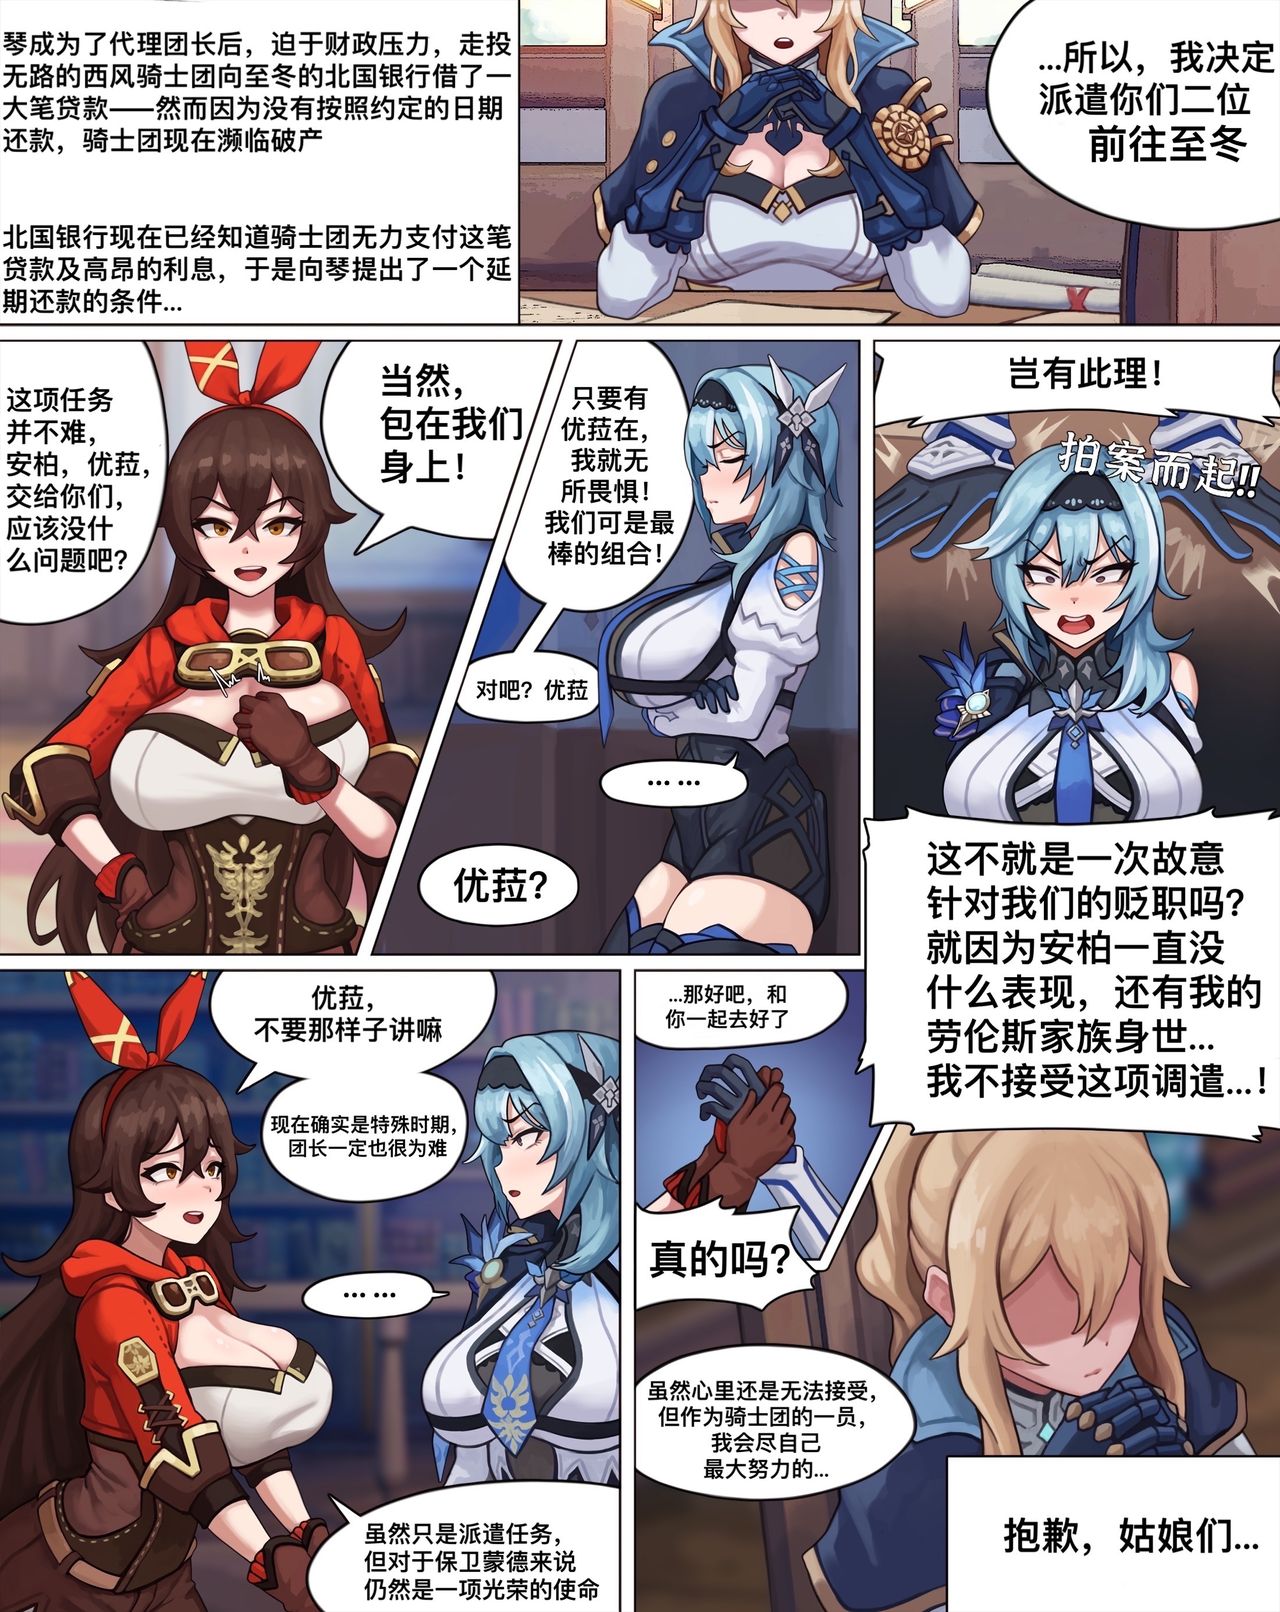 [PoPer] Sexual Service Mission of Knights of Favonius (Part 1)(Chinese)